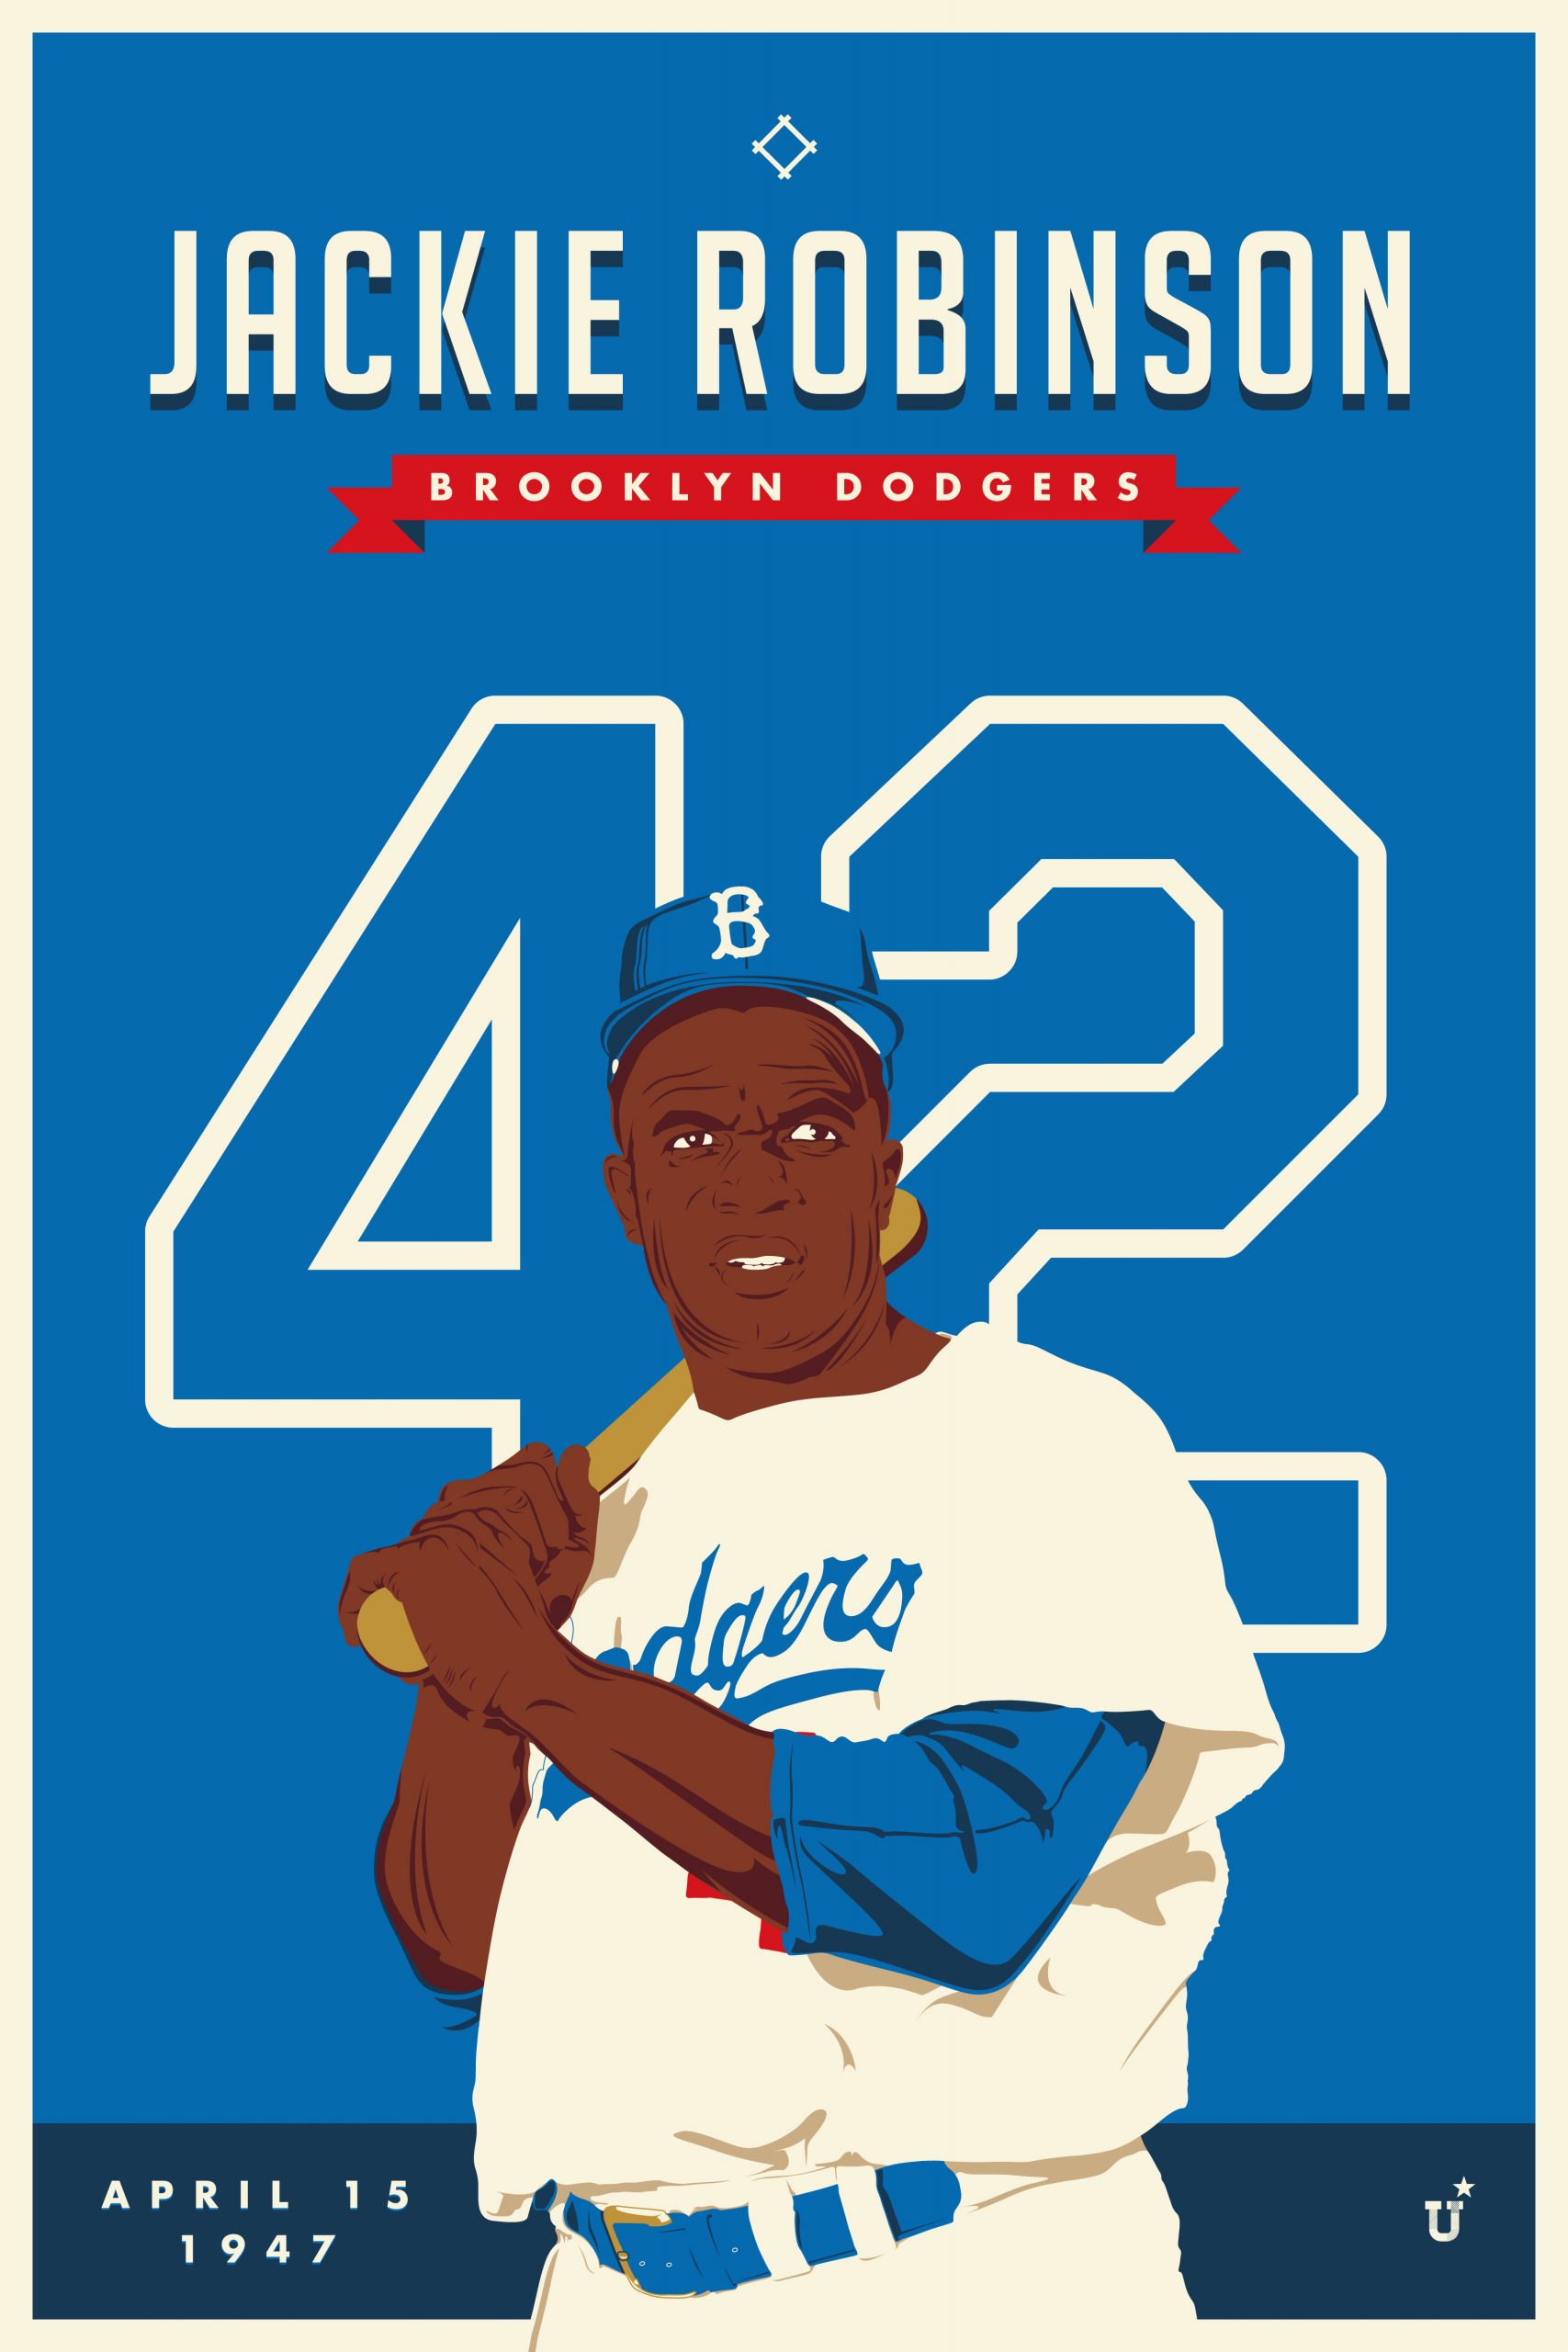 Jackie Robinson Day Projects  Photos, videos, logos, illustrations and  branding on Behance